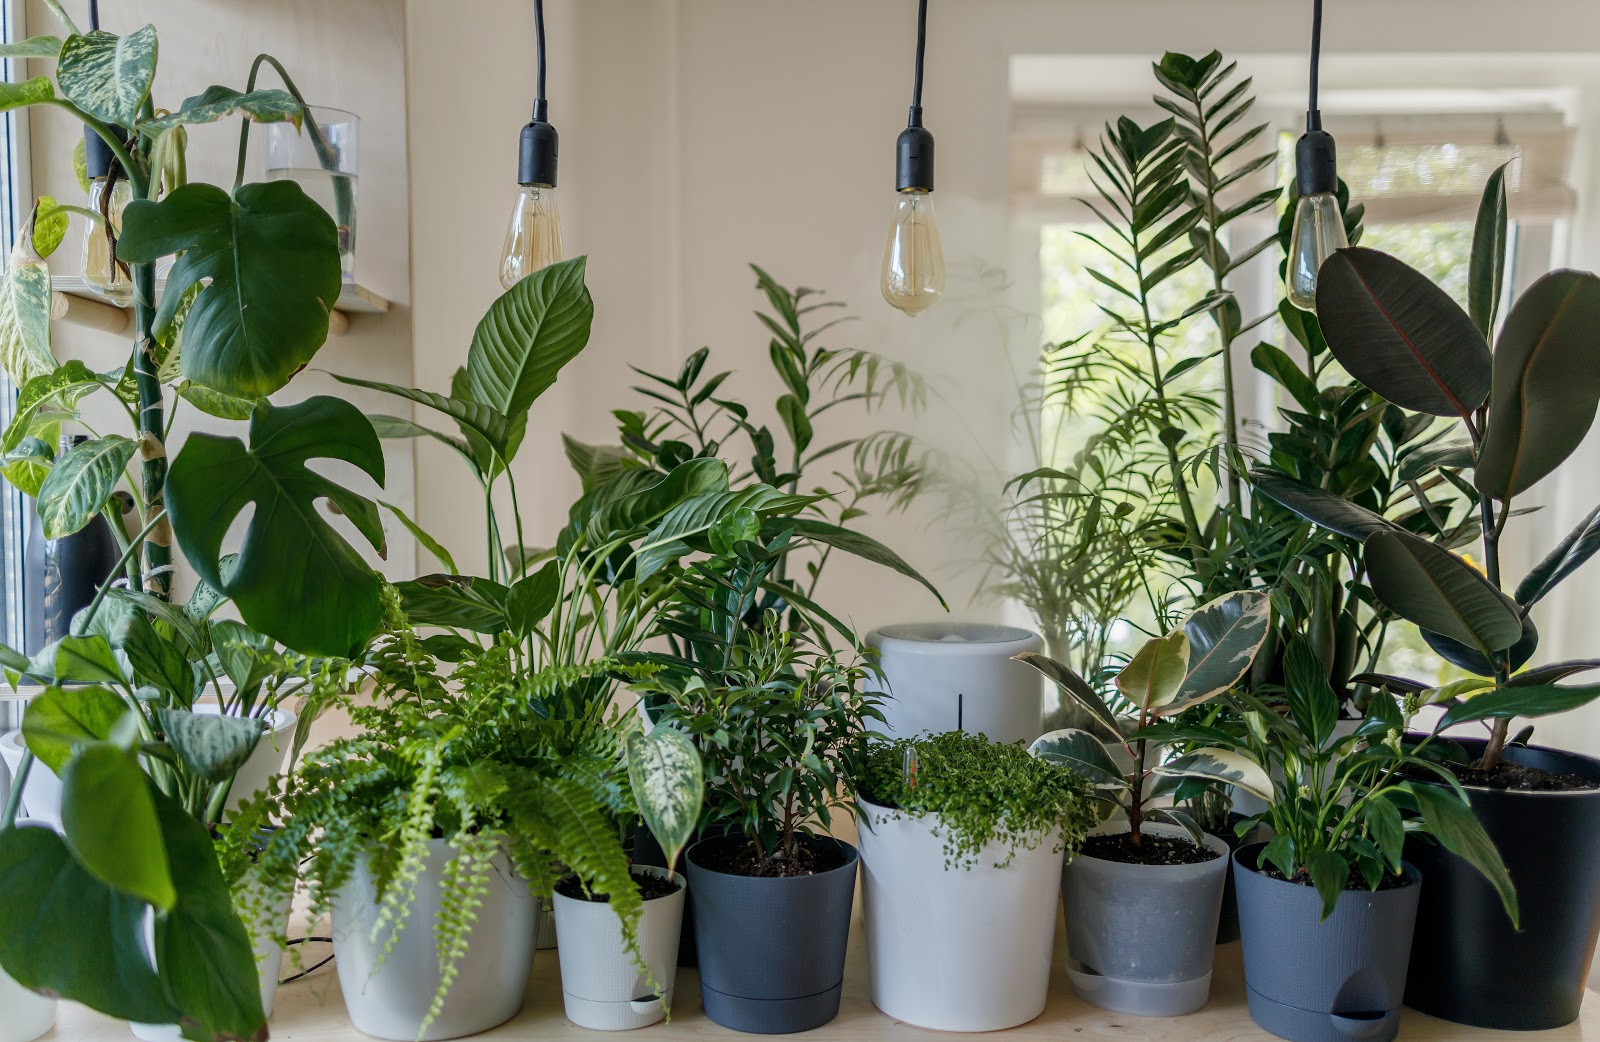 How to Enjoy your Houseplants while Reducing Asthma and Allergy Symptoms